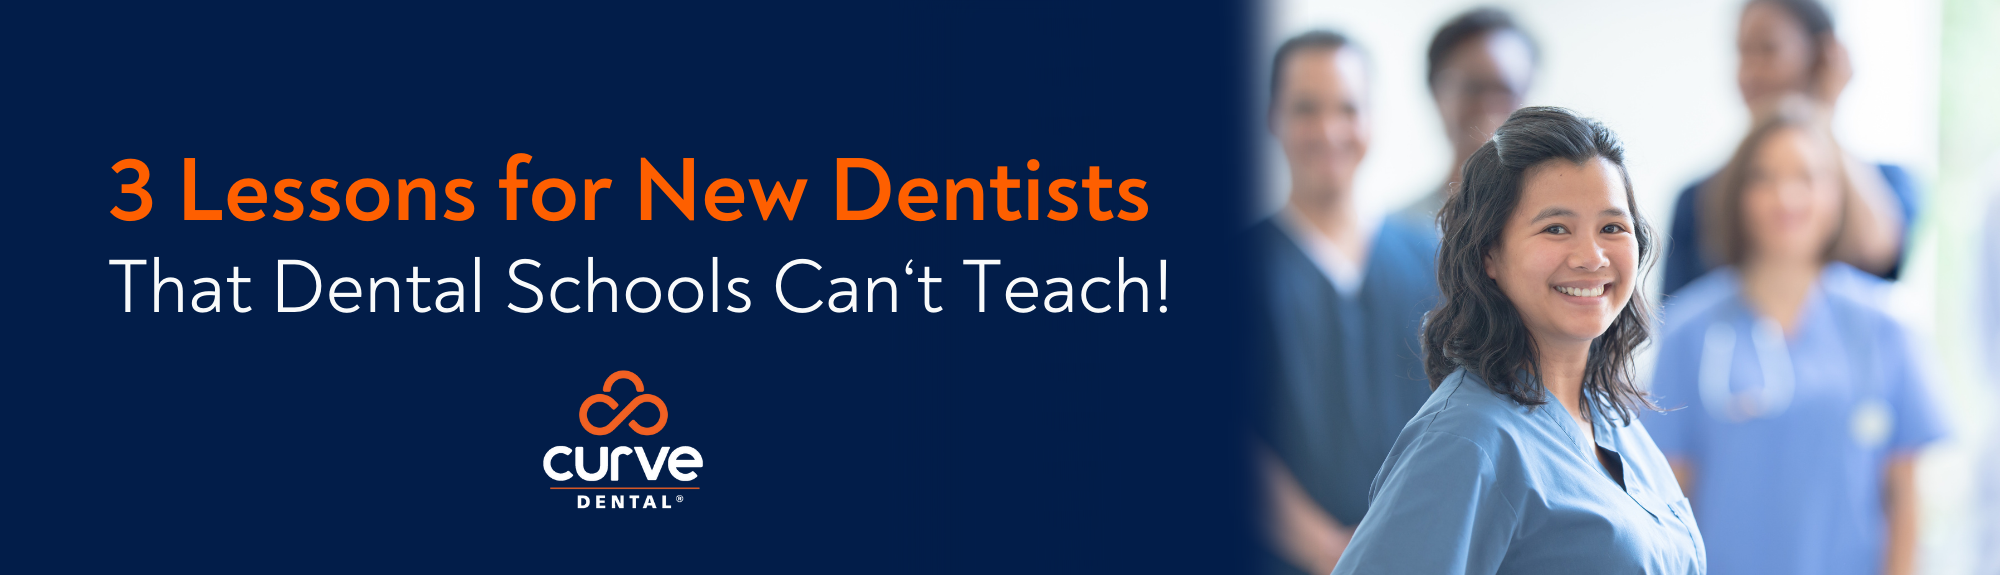 Beyond the Books: 3 Lessons Every New Dentist Should Know that Dental School Doesn't Teach